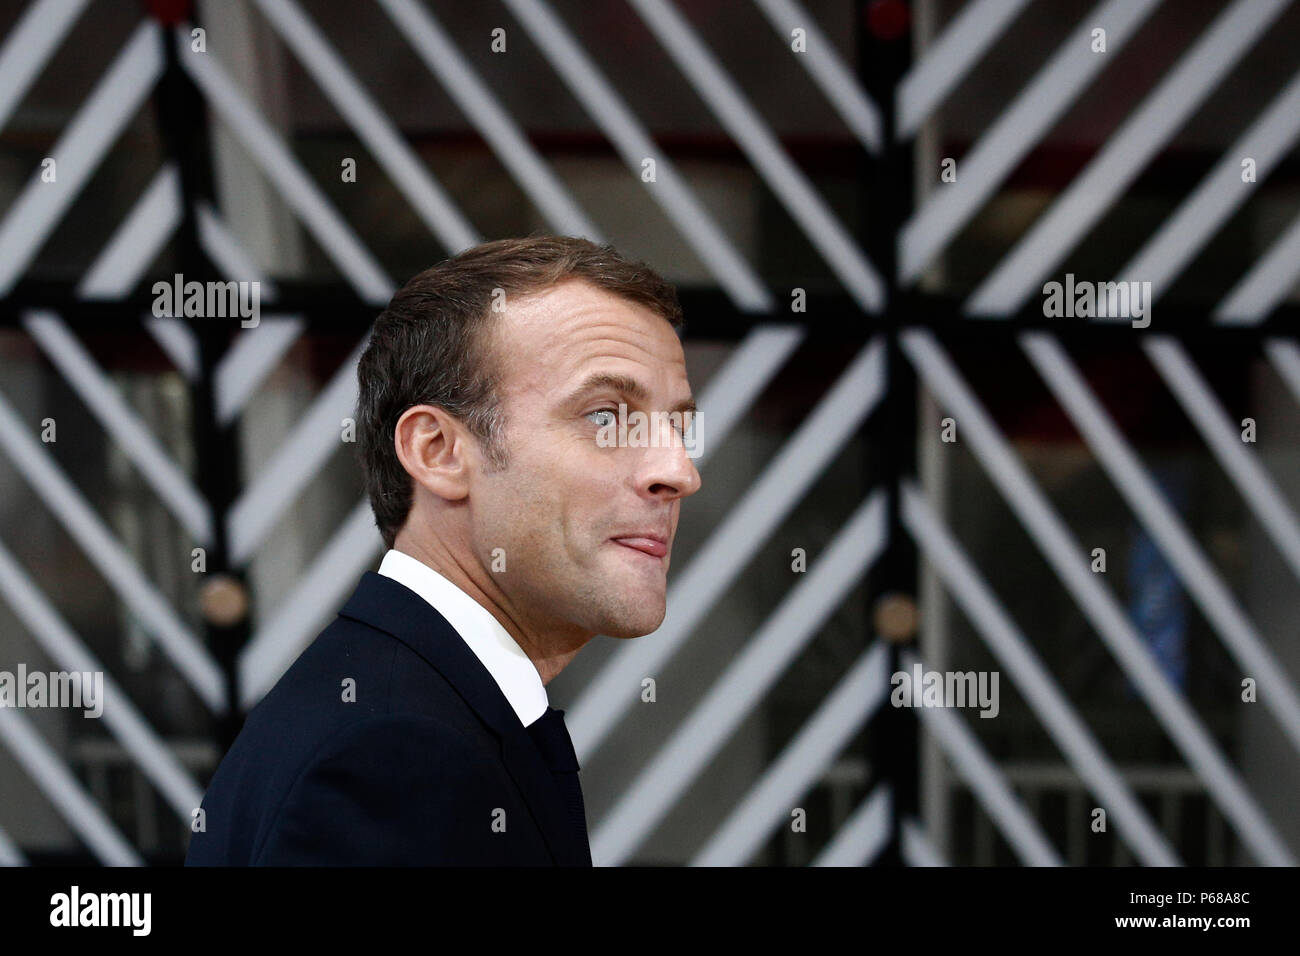 Brussels, Belgium on Jun. 28, 2018. President of France Emmanuel Macron arrives for a meeting with European Union leaders. Stock Photo